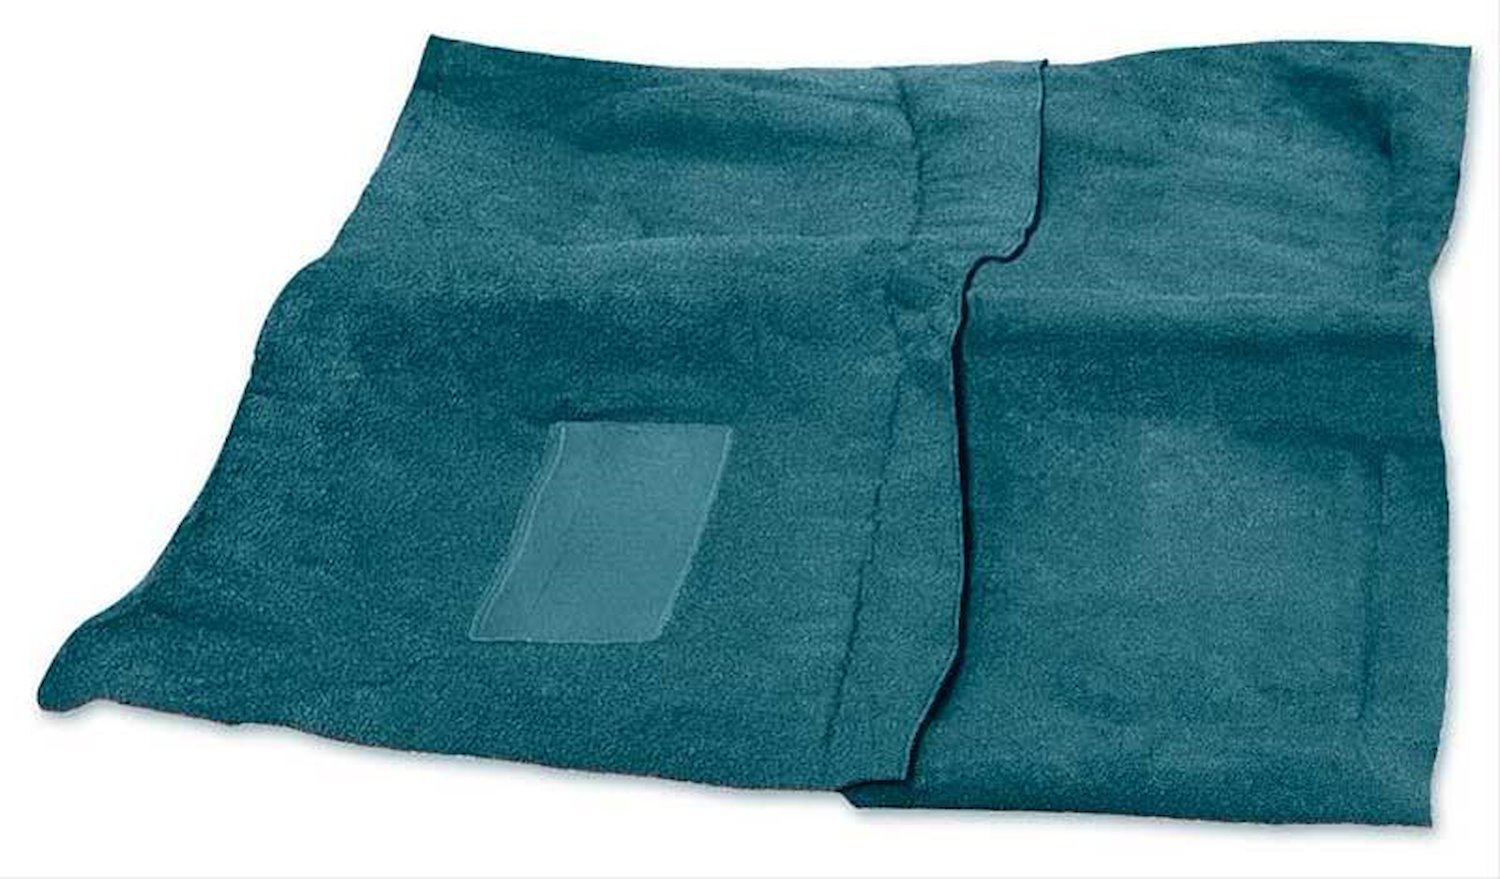 MB957505 Loop Carpet 1968 Dodge Charger With 4-Speed Aqua